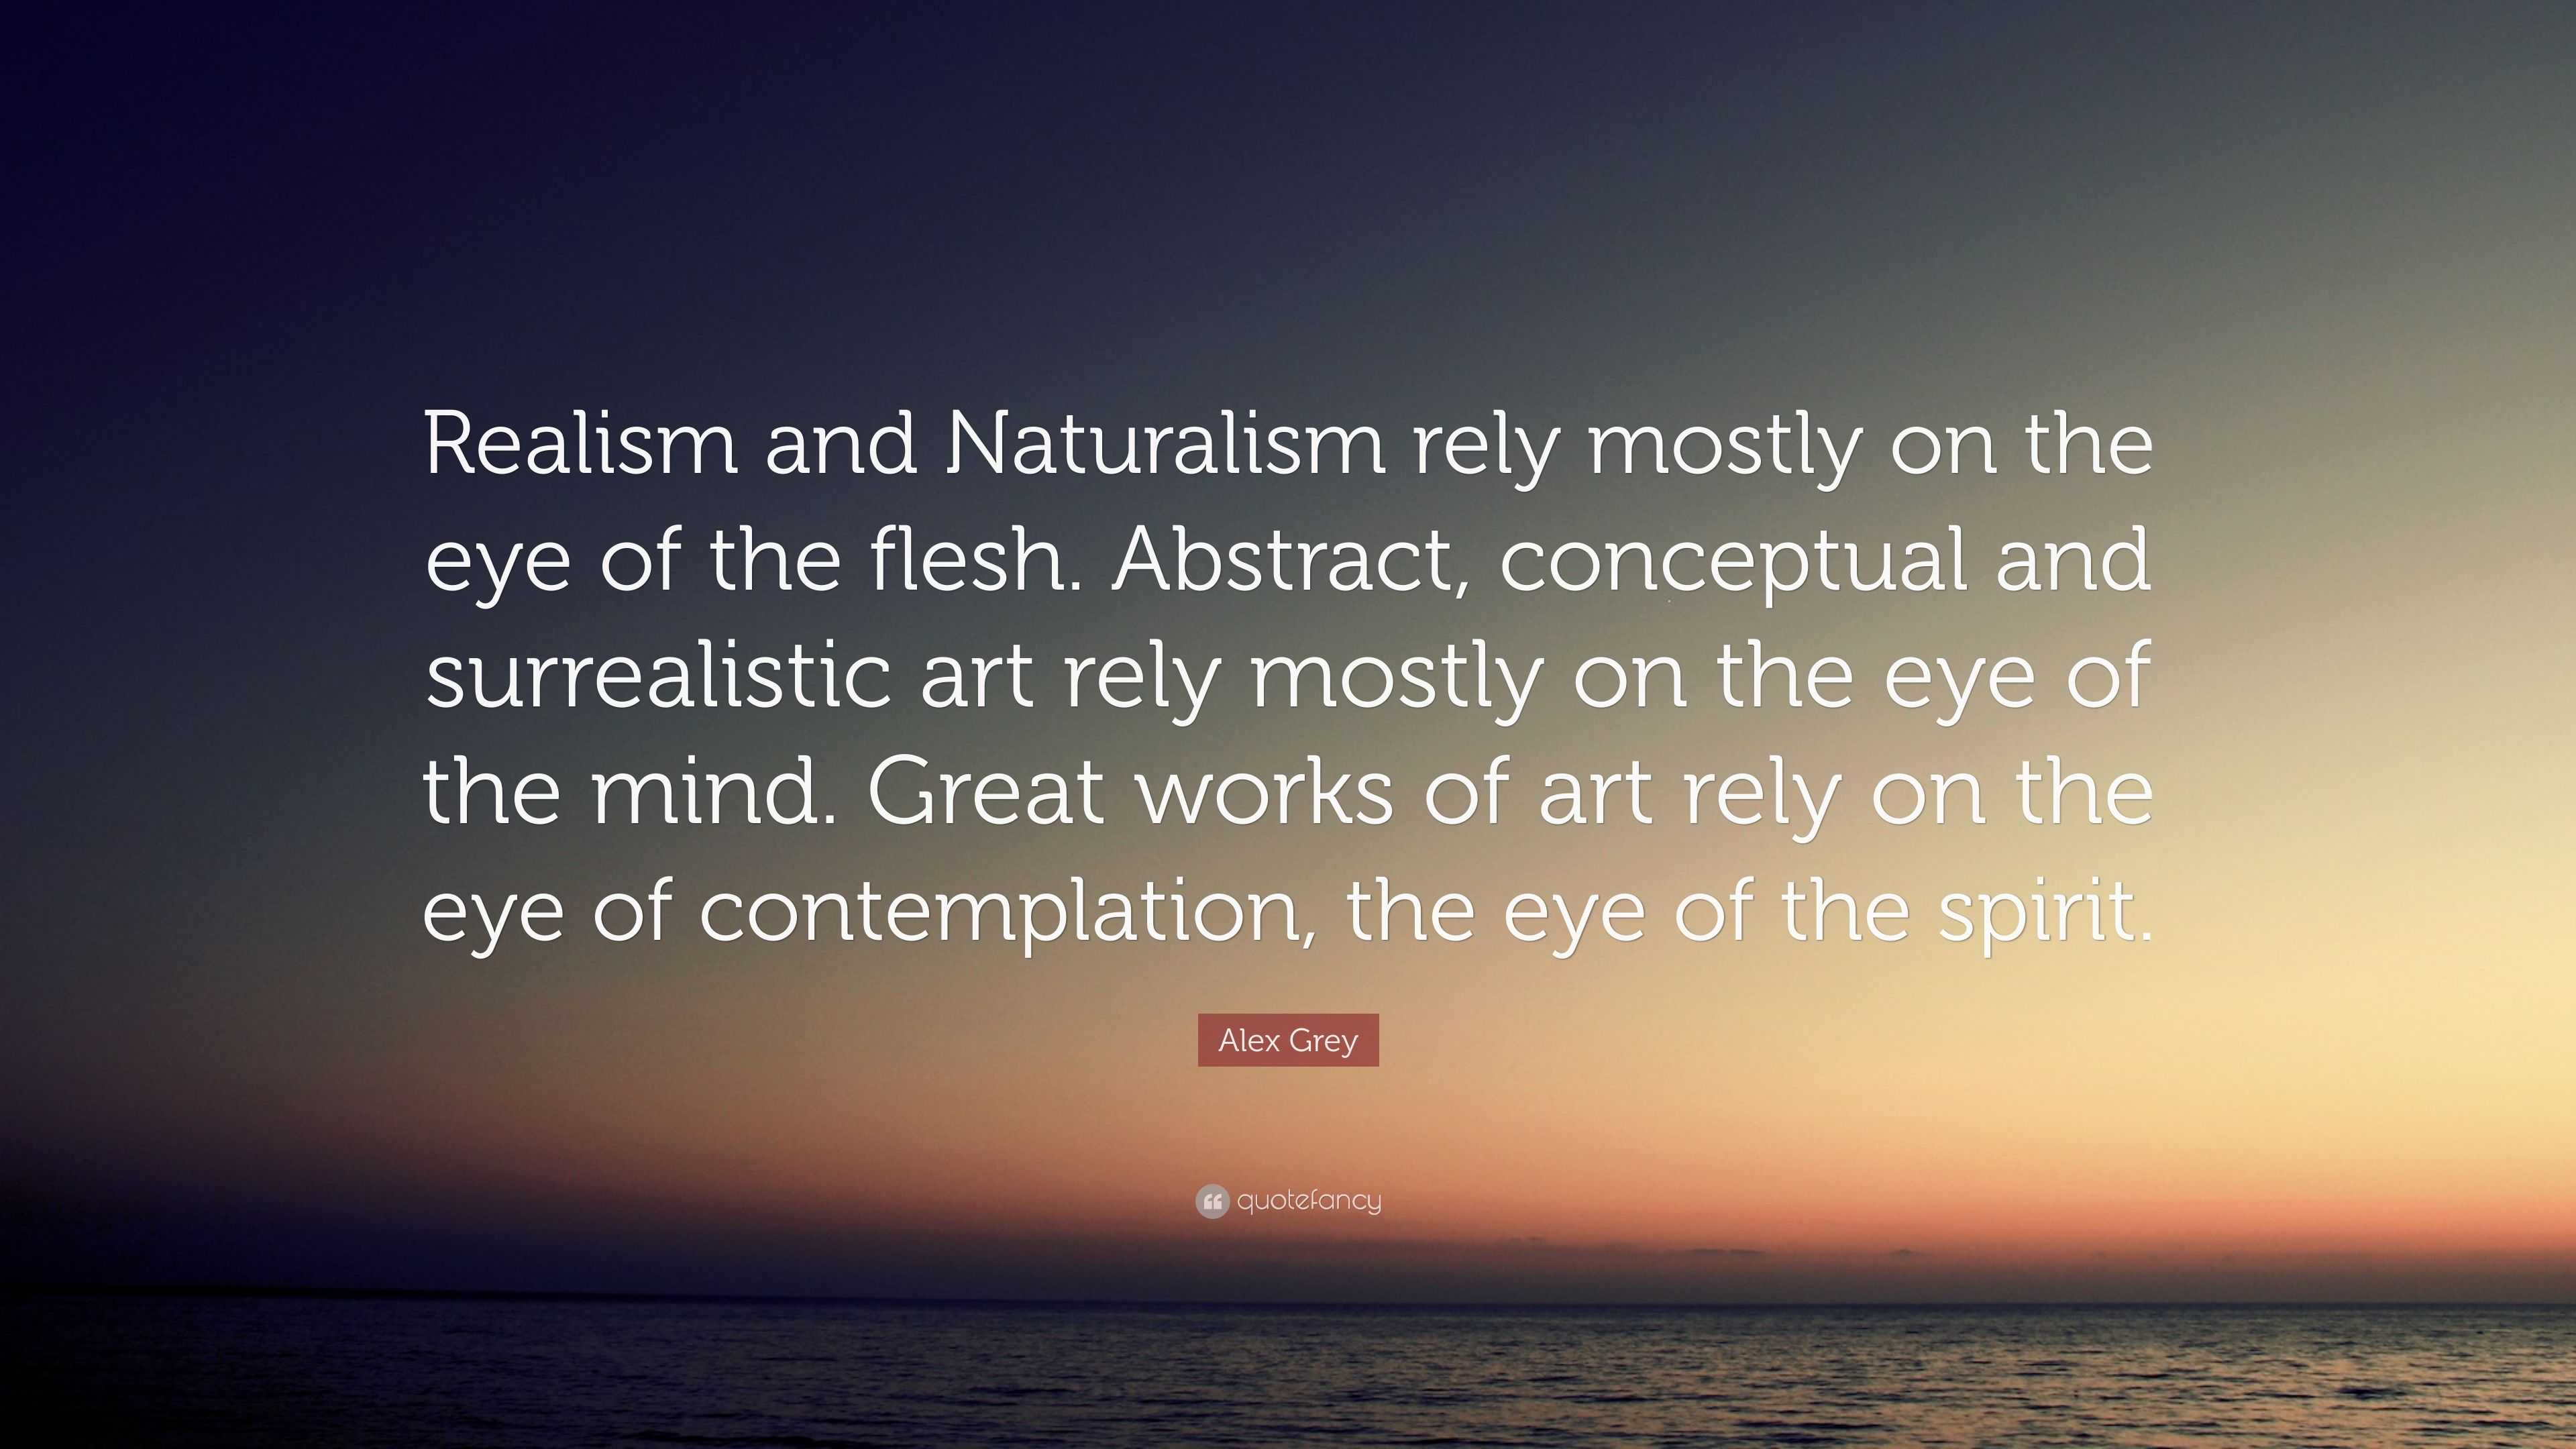 Alex Grey Quote: “Realism and Naturalism rely mostly on the eye of the ...